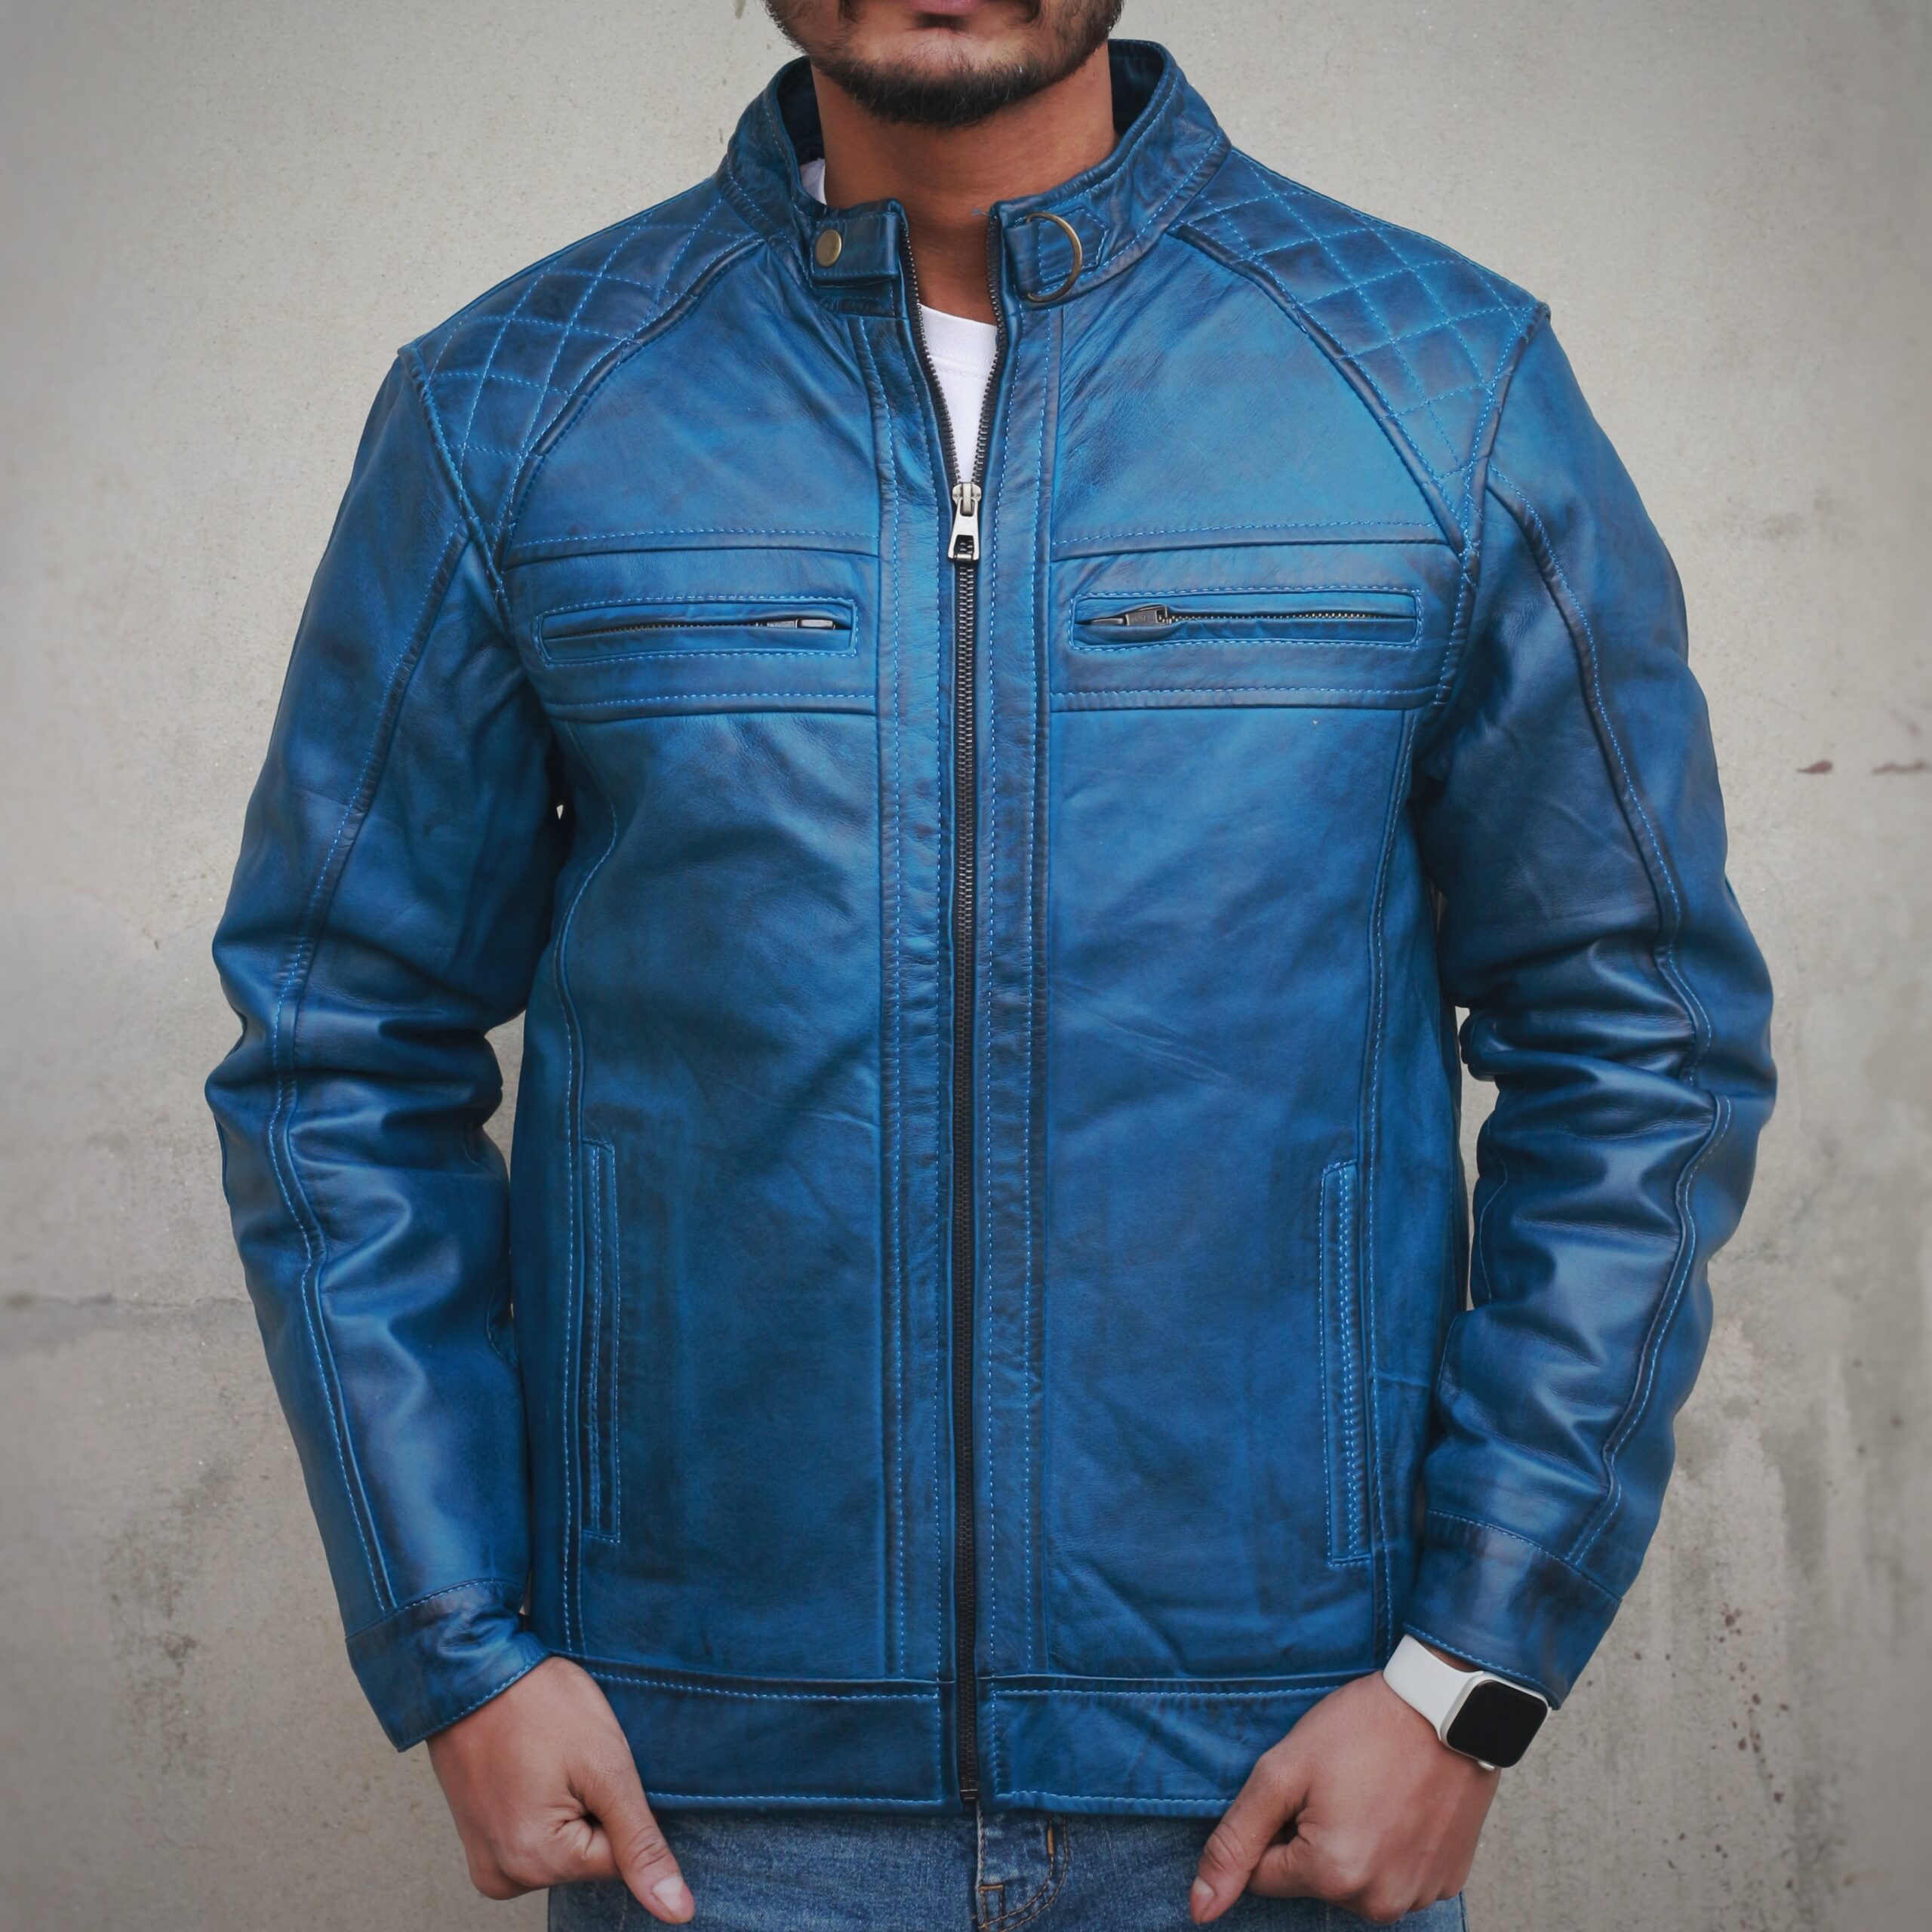 Shop Men's Leather Jacket: Classic to Trendy Styles in Pakistan!